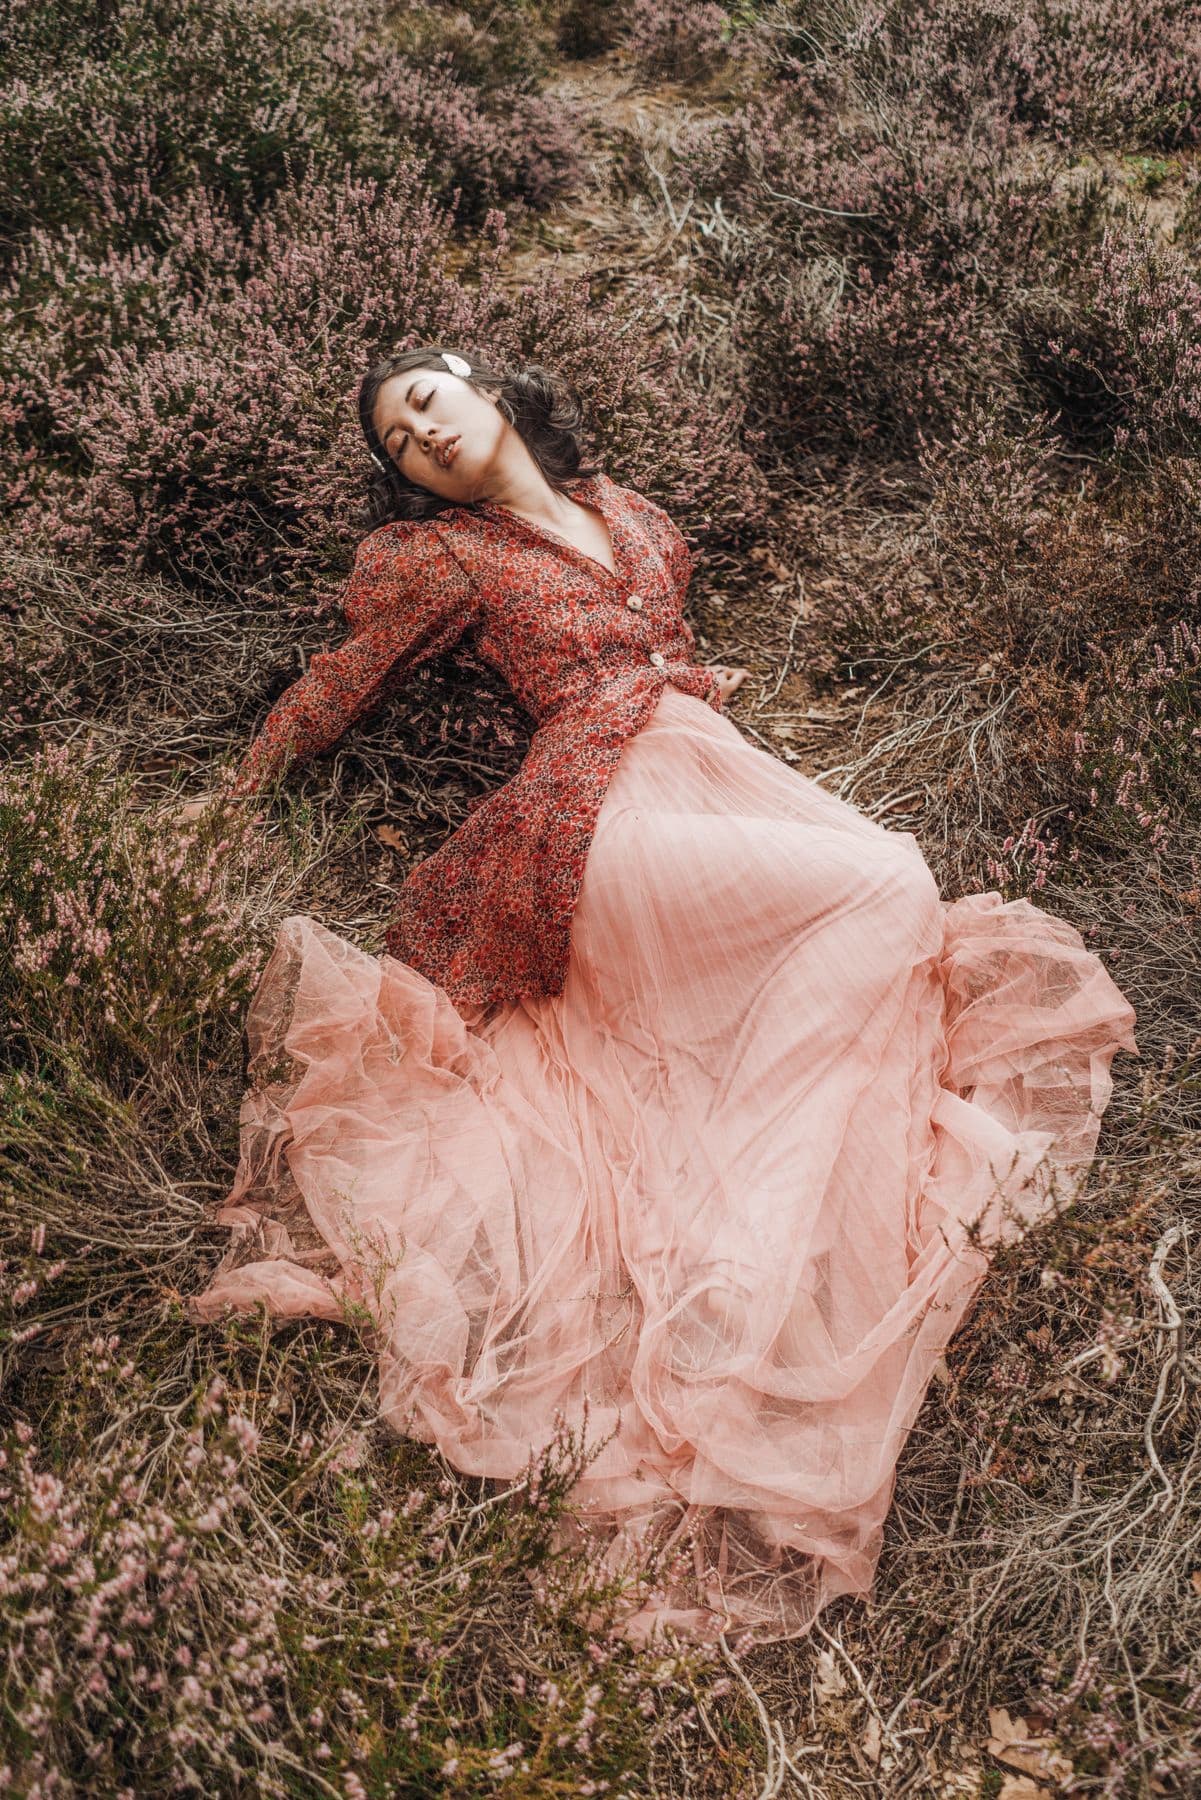 Female Model Lies Among Wildflowers In A Pink Skirt And A Long Blouse